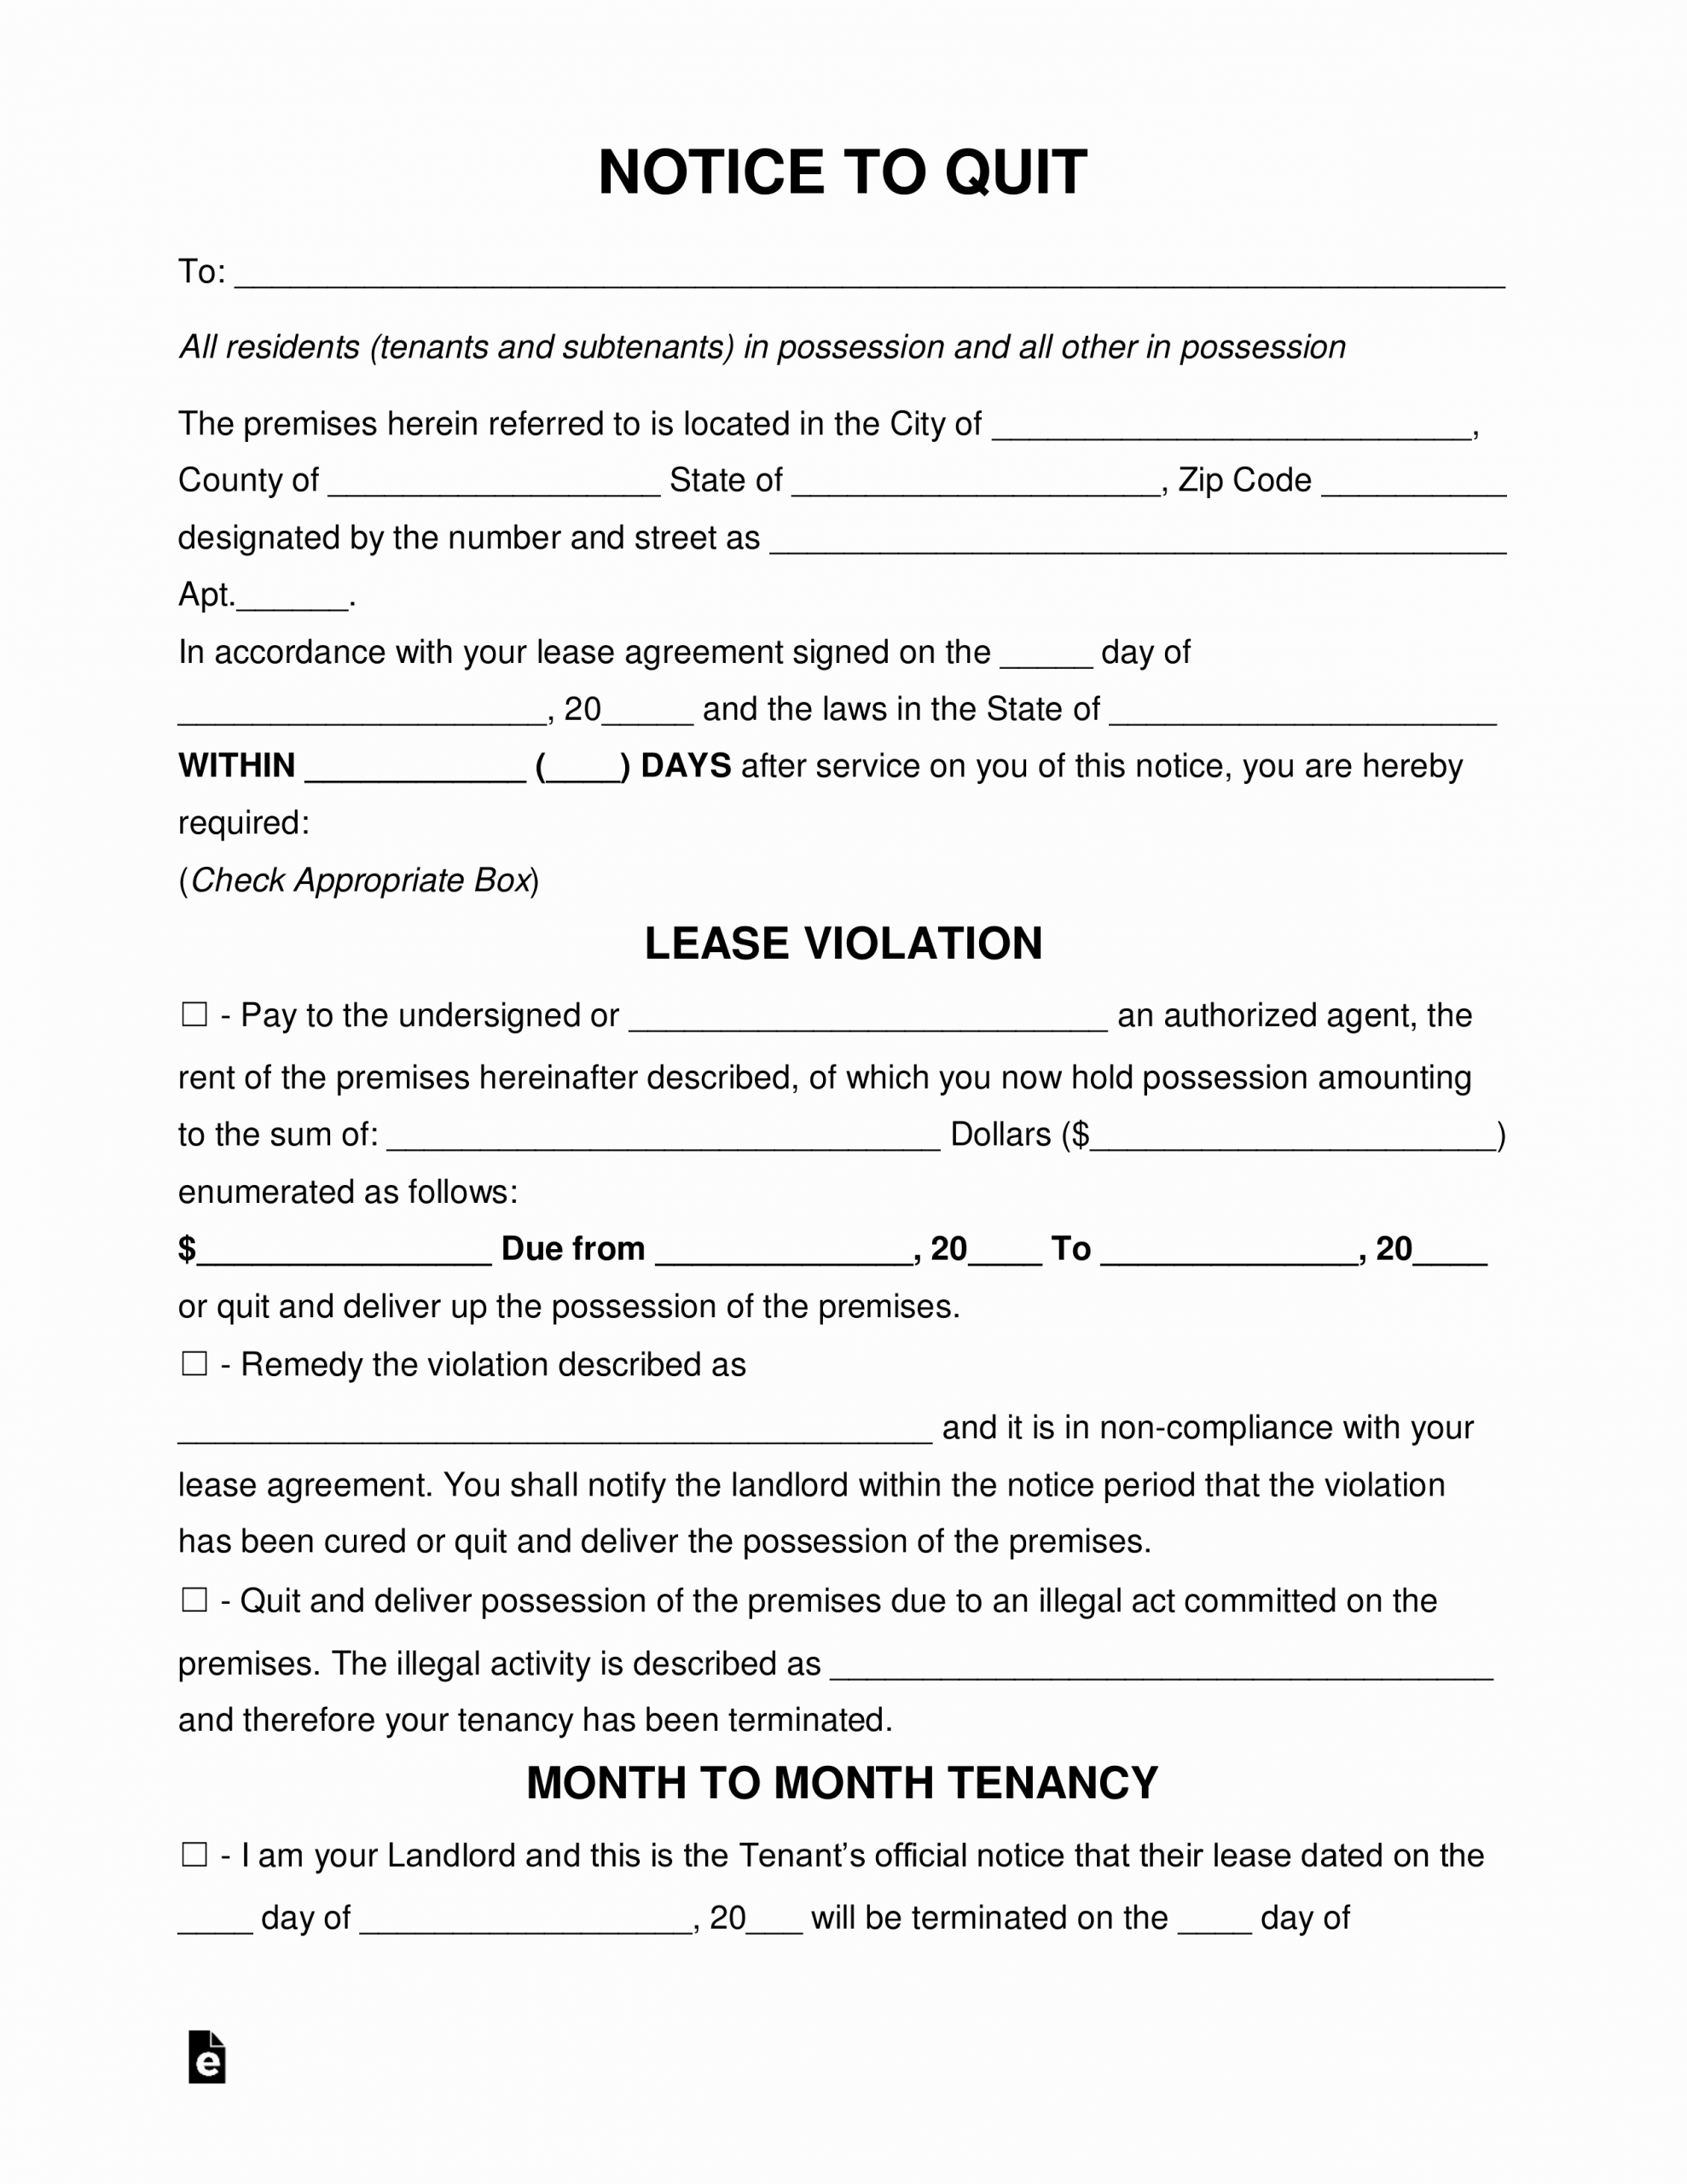 Eviction Notice Template Florida Awesome Free Eviction Notice Templates Notices to Quit Pdf